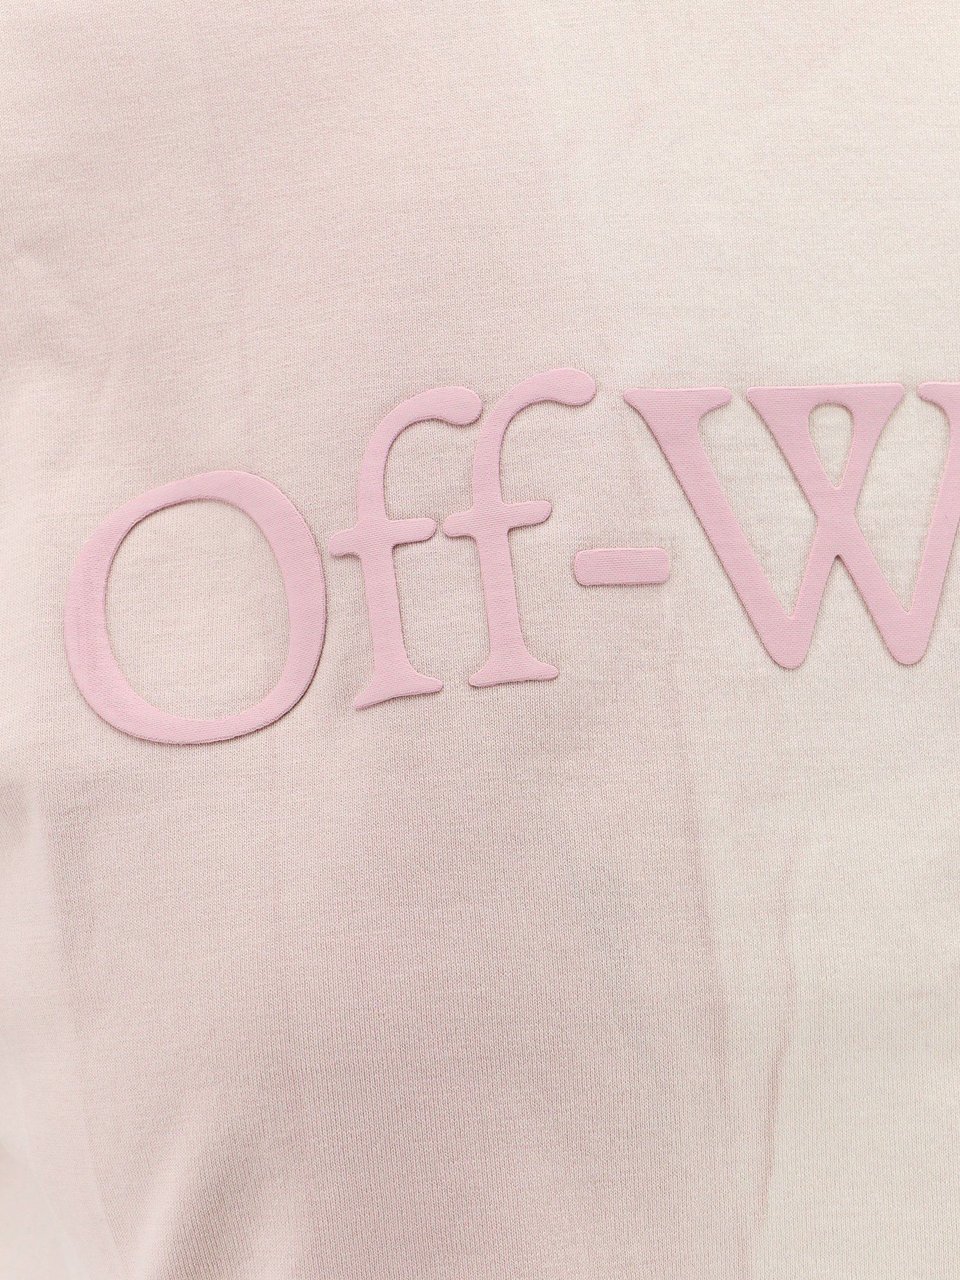 OFF-WHITE Cotton t-shirt with frontal logo Roze